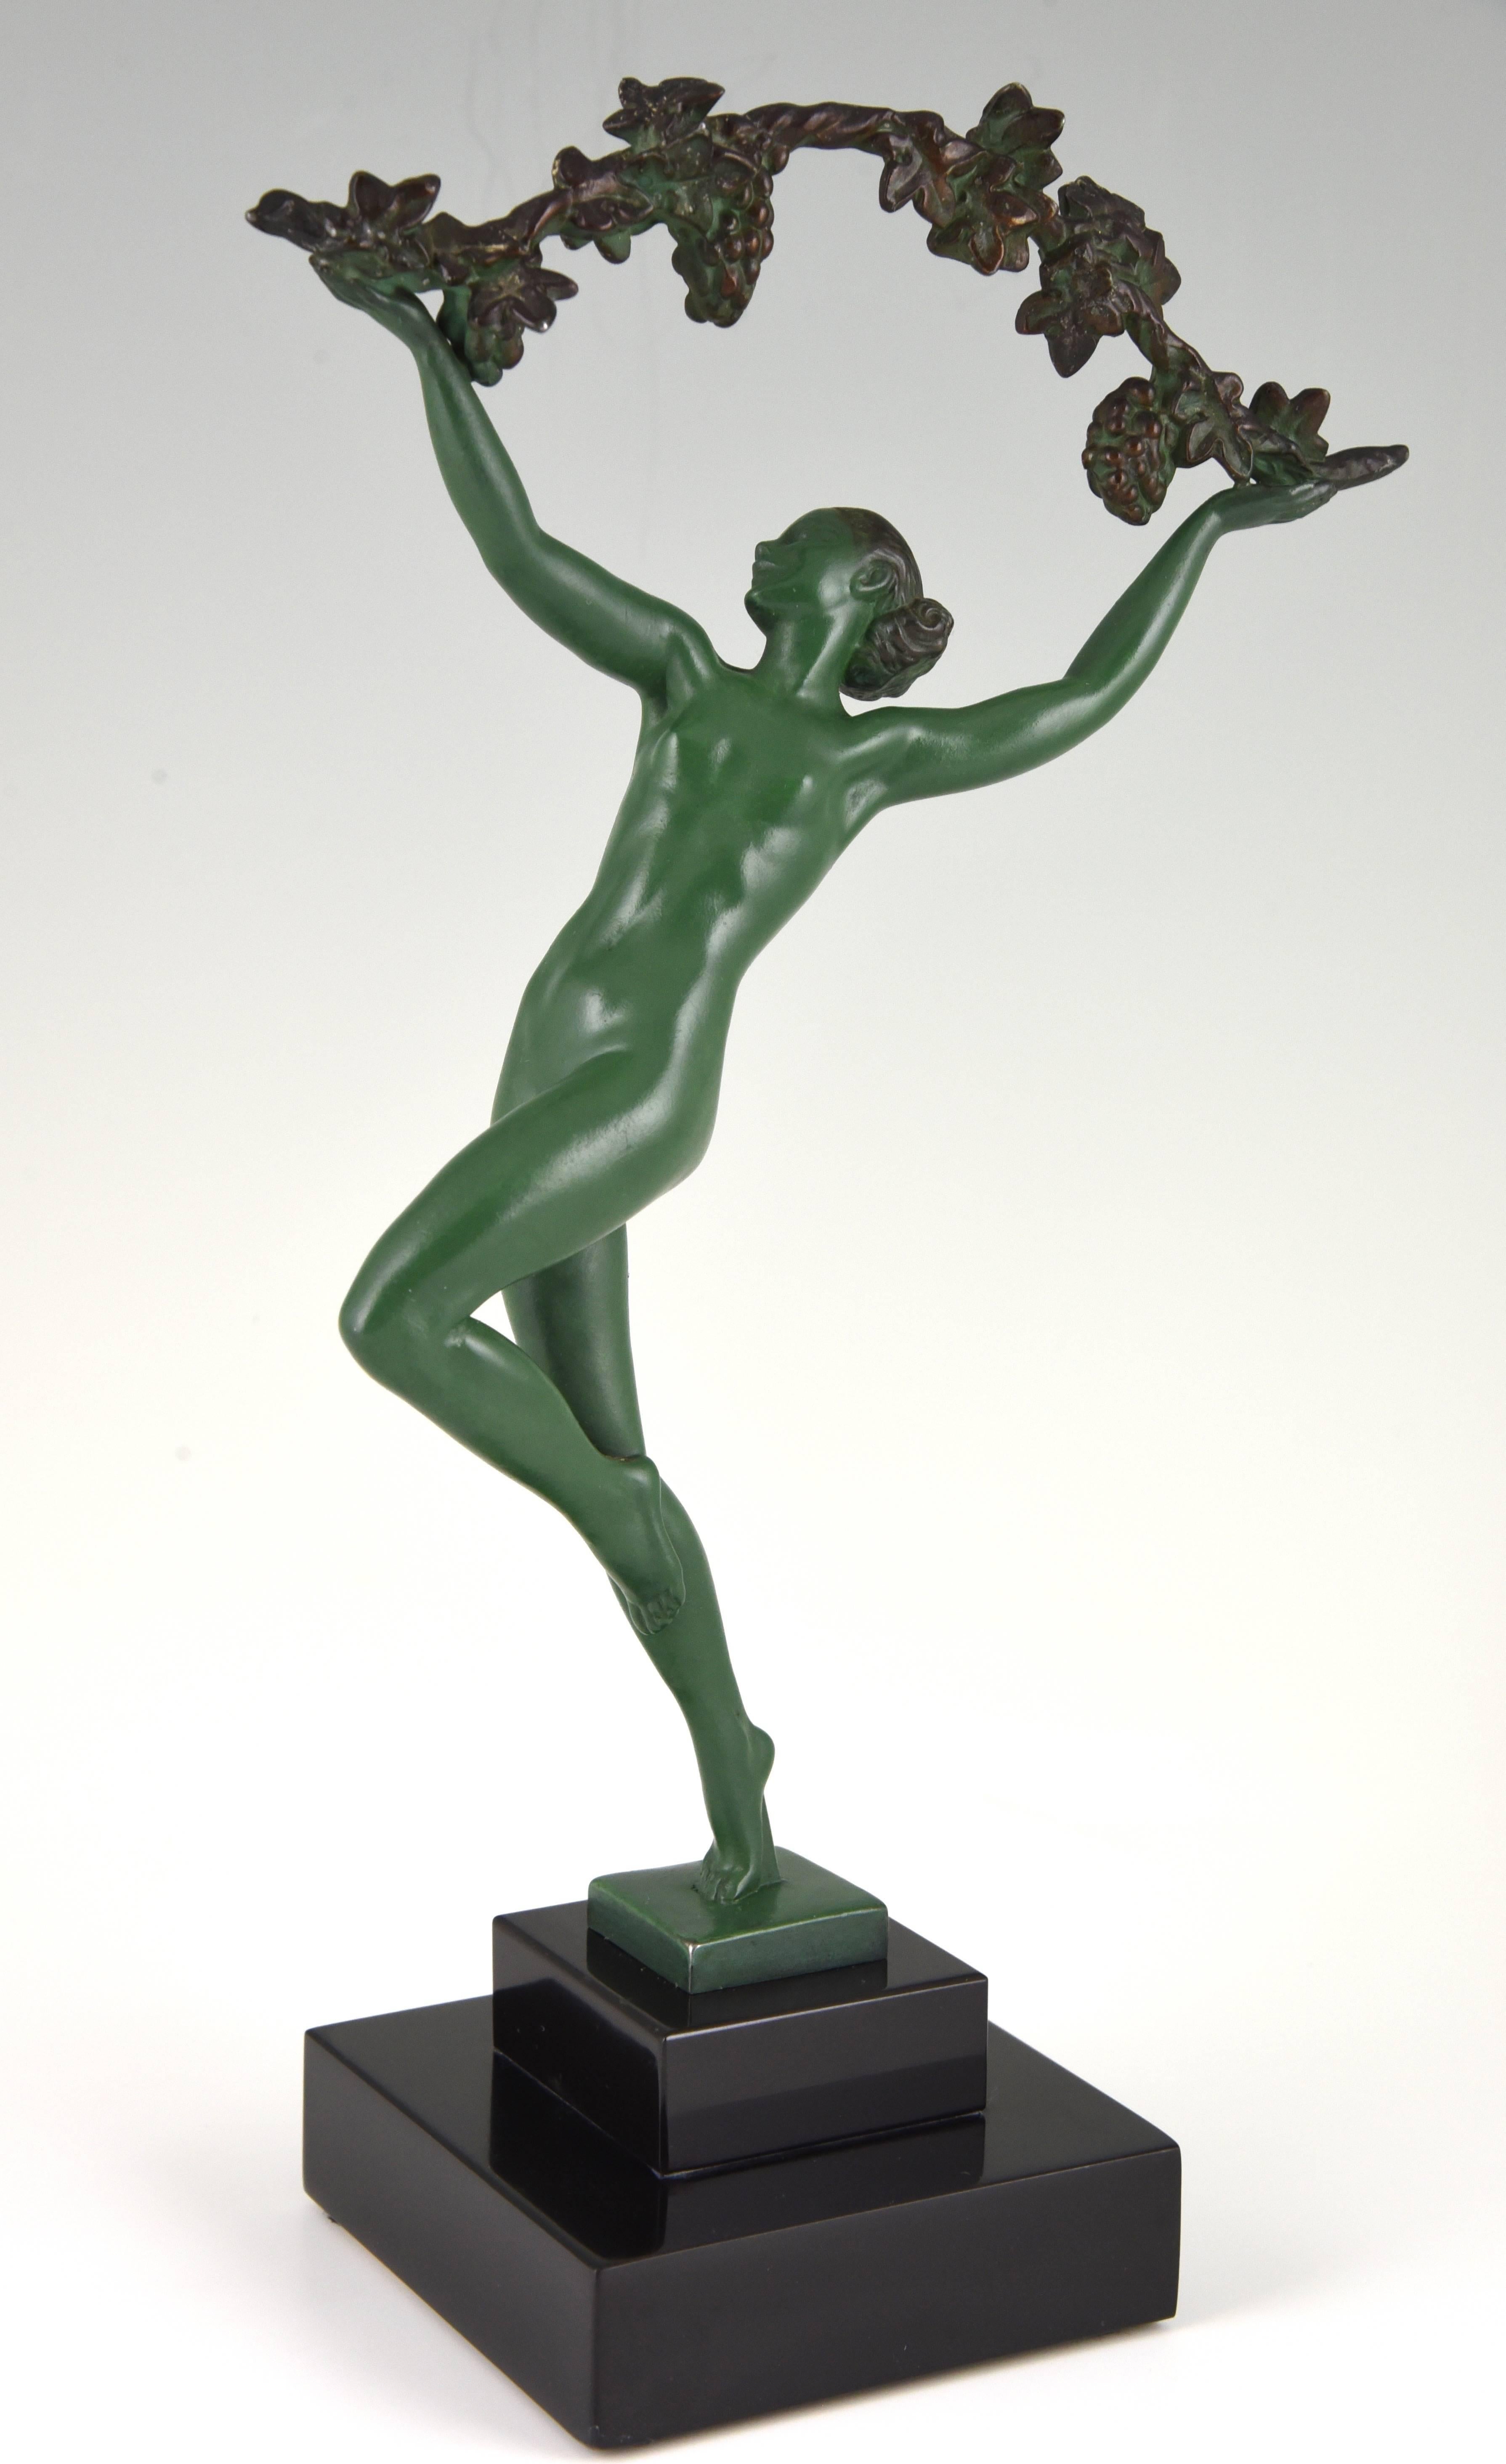 Art Deco sculpture of a nude with a branch of grapes.

Artist/ maker: Raymonde Guerbe.
Signature/ marks: Guerbe. Cast by the Max Le Verrier foundry.
Style: Art Deco
Date: 1925
Material: White metal, light green patina, on a black marble